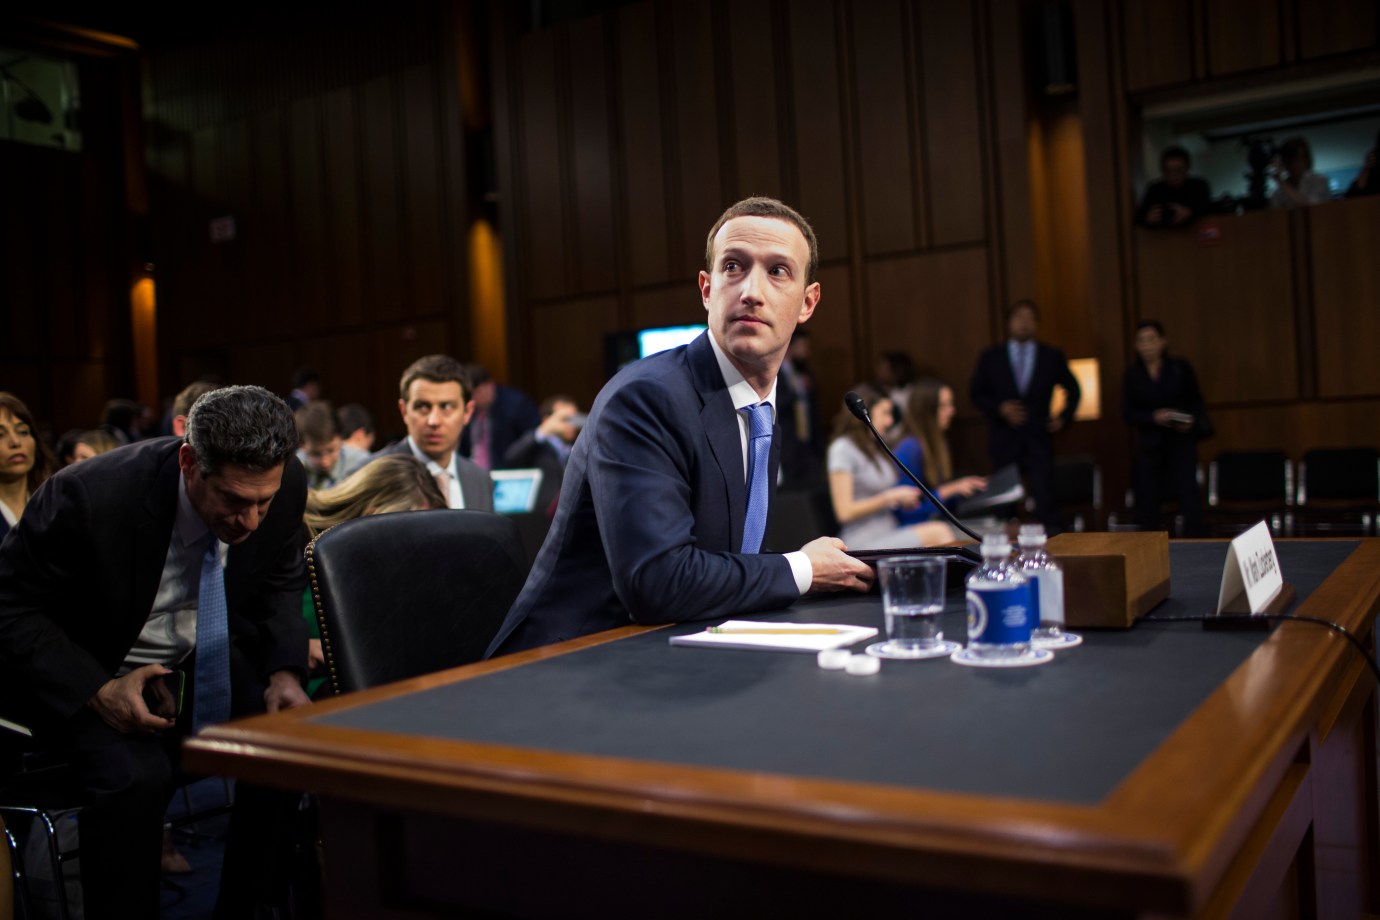 Facebook co-founder and CEO Mark Zuckerberg testifies before a combined Senate Judiciary and Commerce Committee hearing in the Hart Senate Office Building in Washington, D.C., on April 10, 2018. (Photo by Zach Gibson/Getty Images)